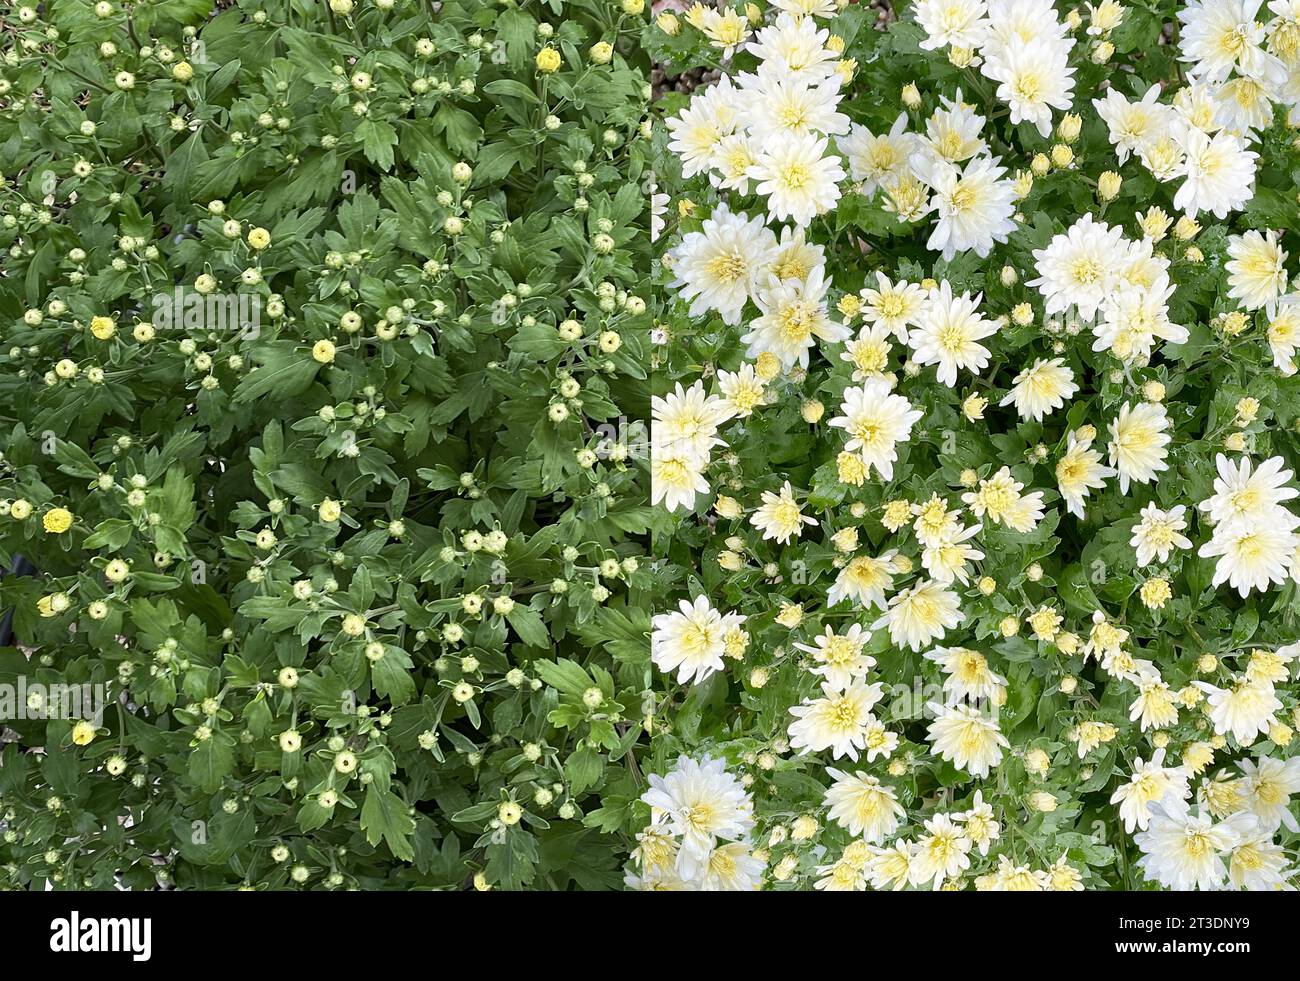 Blooming Bush Flowers before and after stages and flowering process as a change metaphor and botany or environmental natural evolution with green Stock Photo